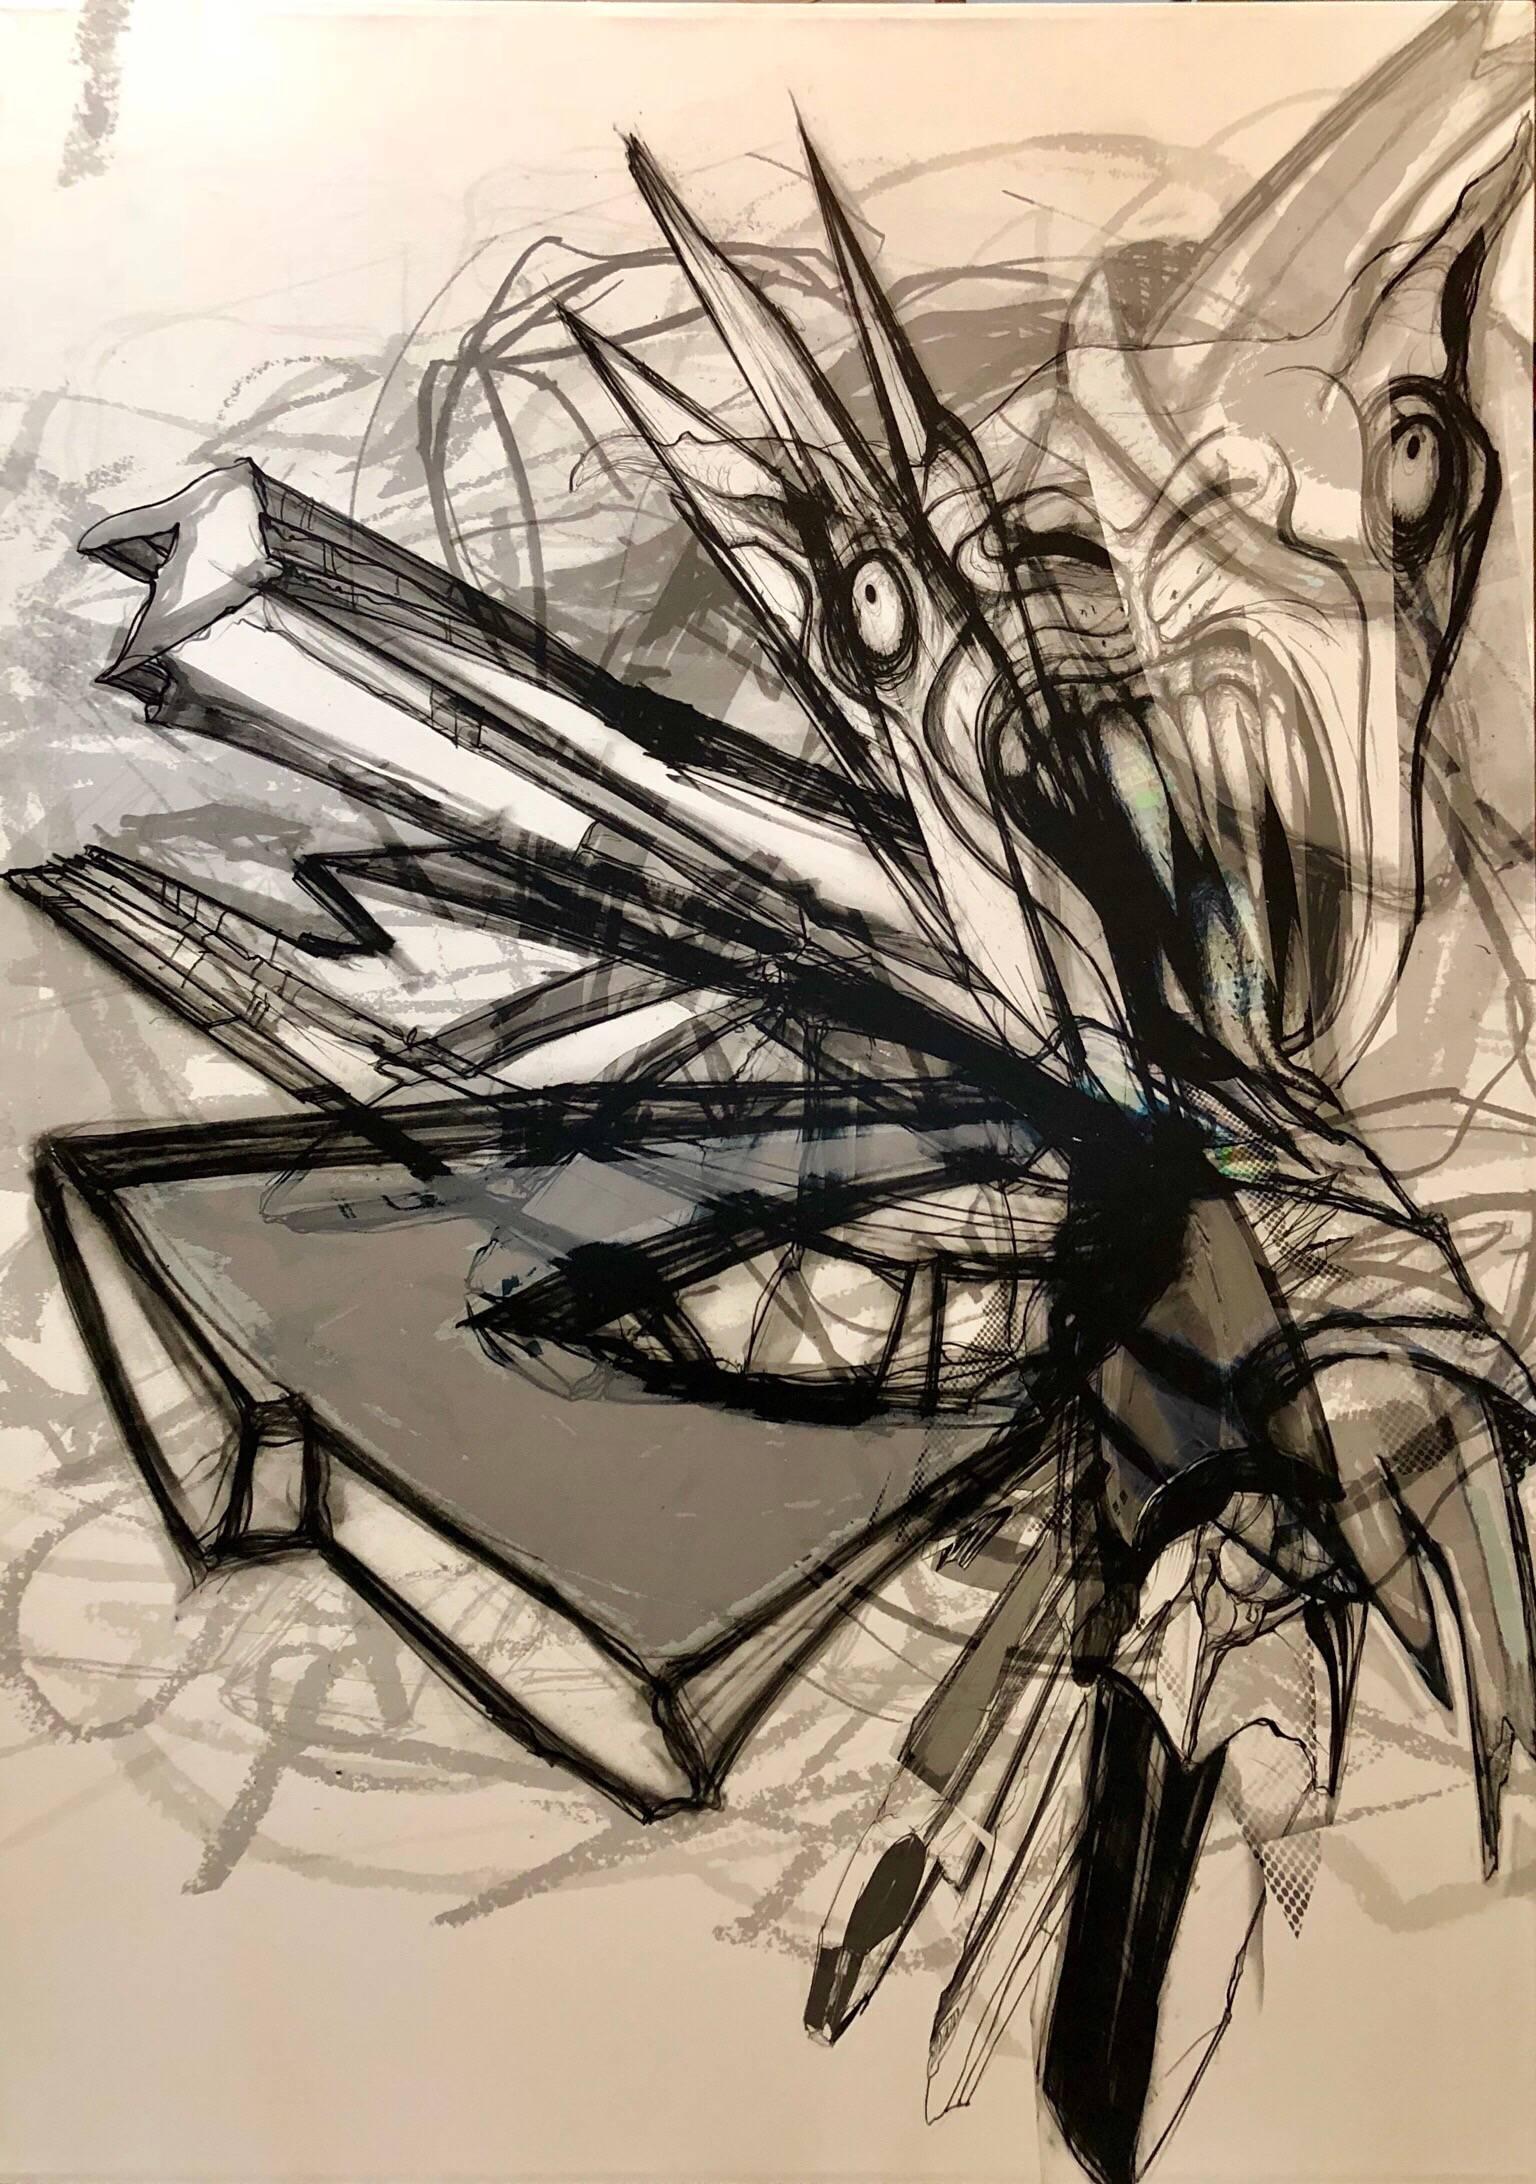 From his show Hashish at Michael Steinberg Gallery (bearing their label verso)
Reviewed by Roberta Smith in the New York Times.
Abstract Expressionism meets graffiti photography. Cy Twombly in cyberspace. Existential physics. The trajectories of car